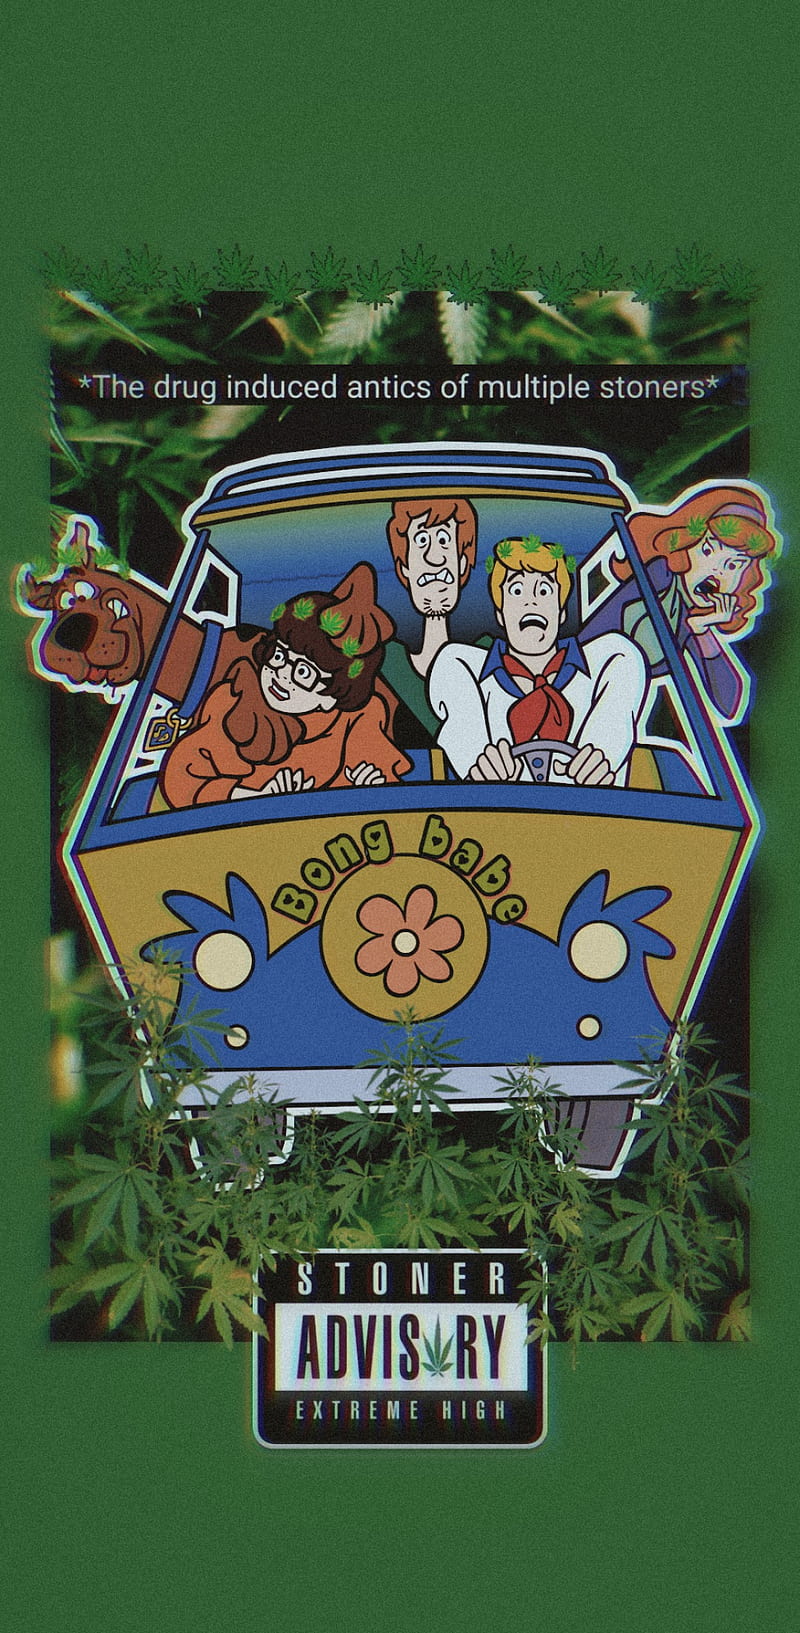 scooby doo and shaggy getting high